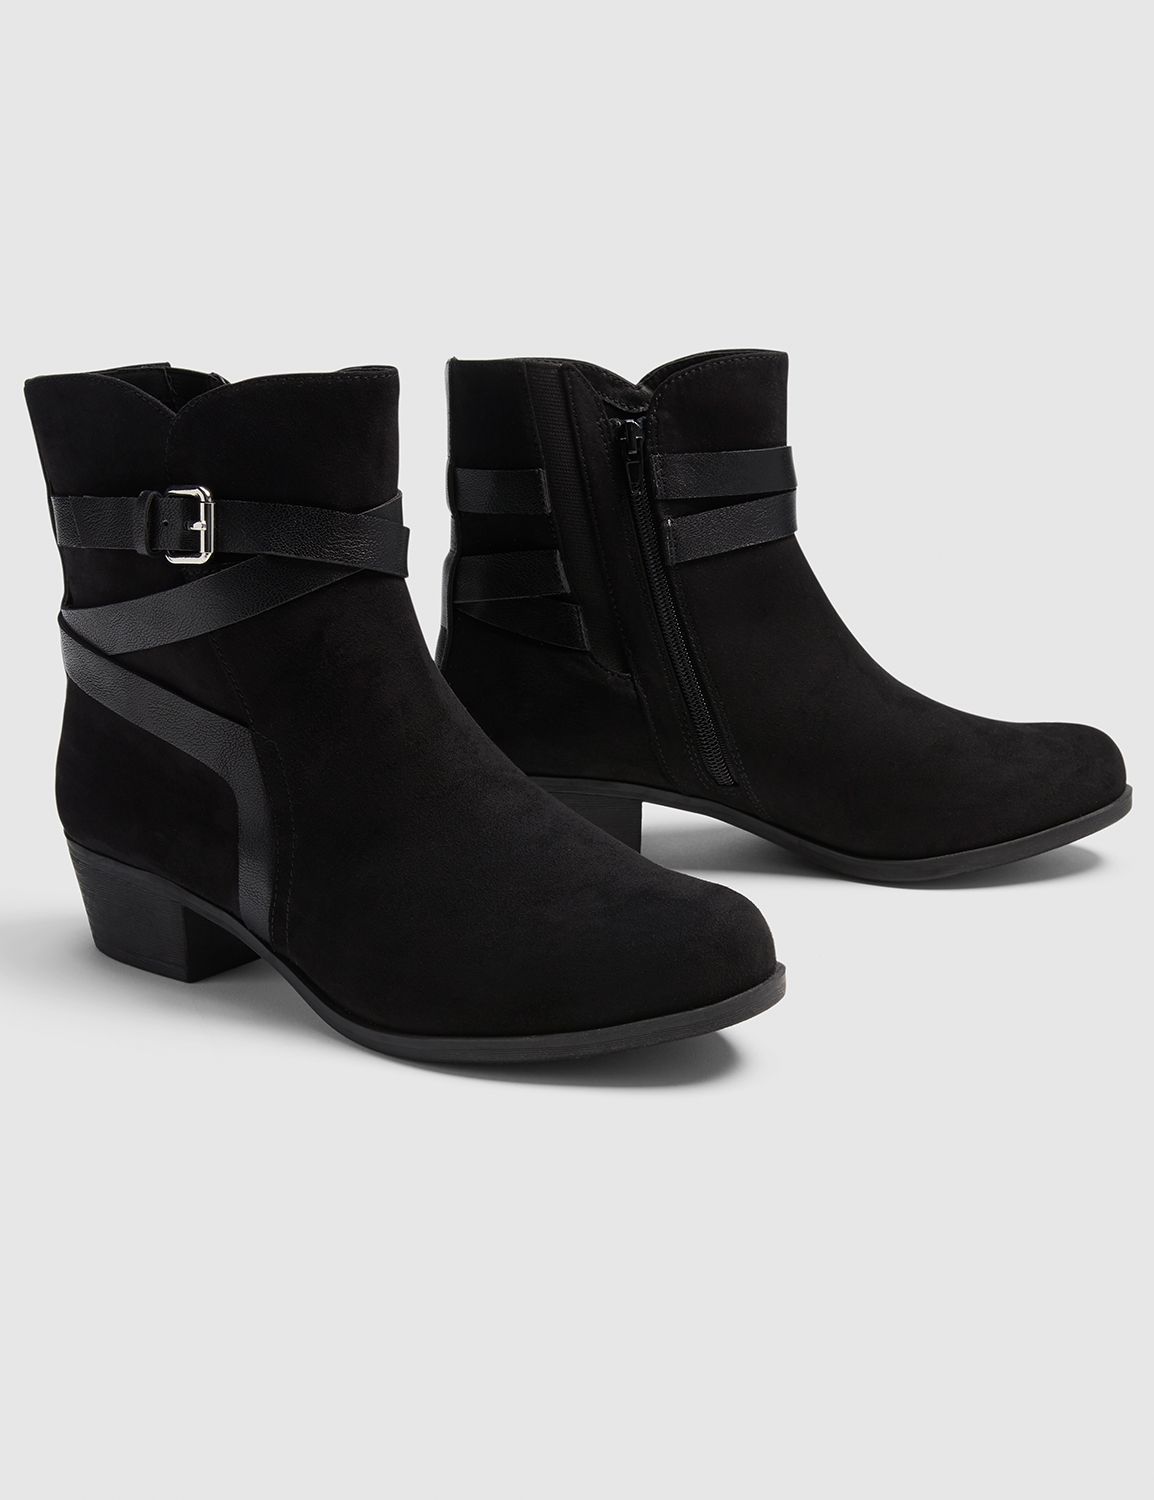 lane bryant suede boots